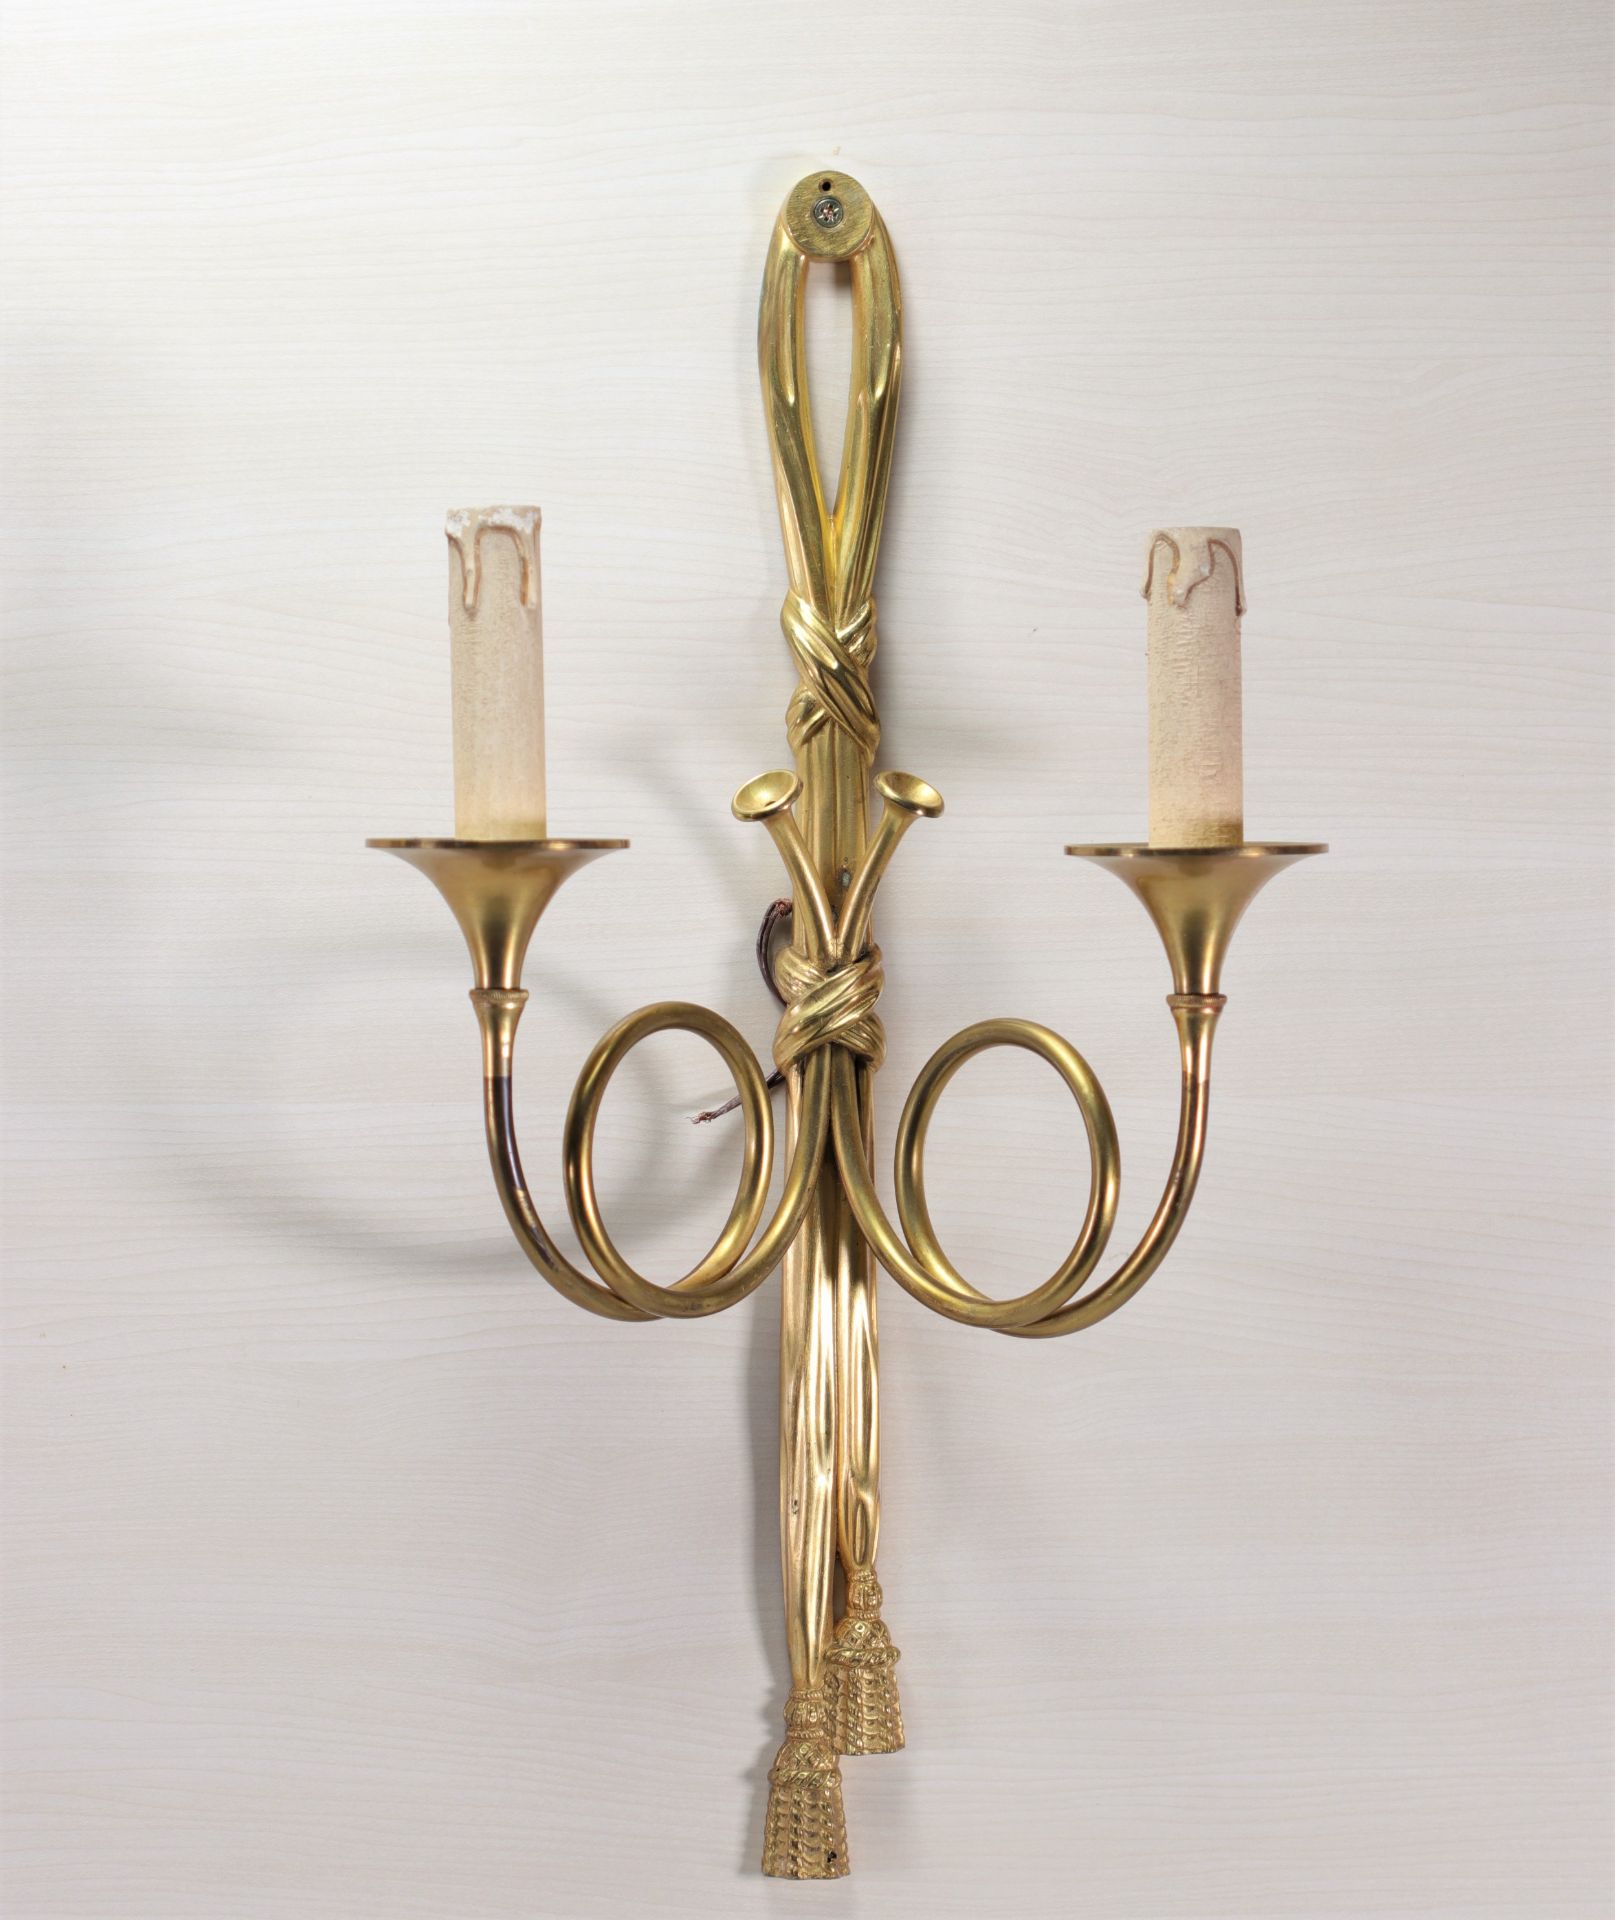 Series of four gilt bronze sconces forming knots - Image 3 of 3